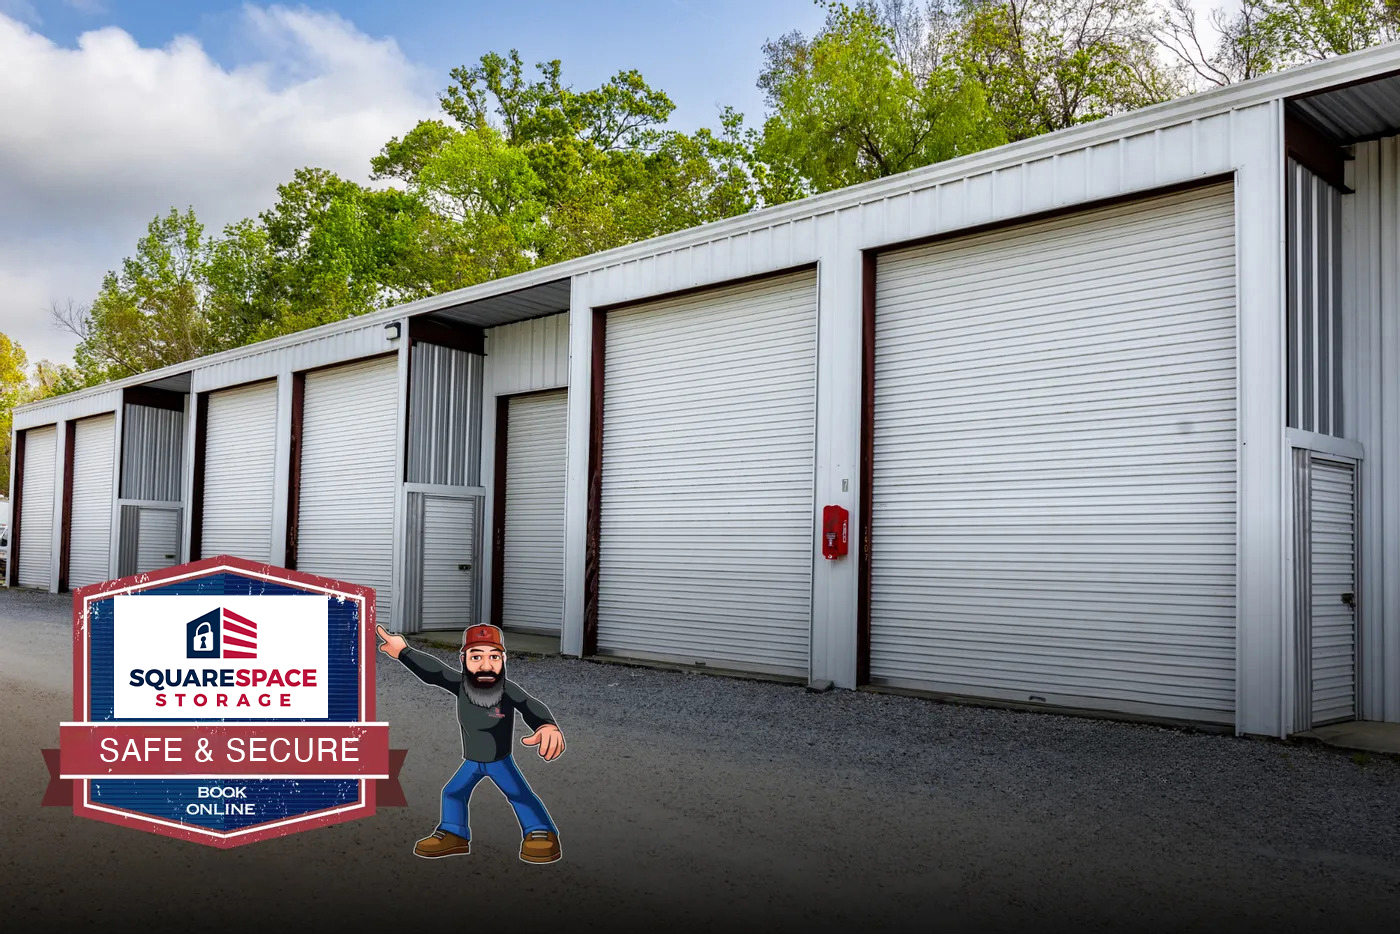 Variety of drive-up storage units in Baton Rouge